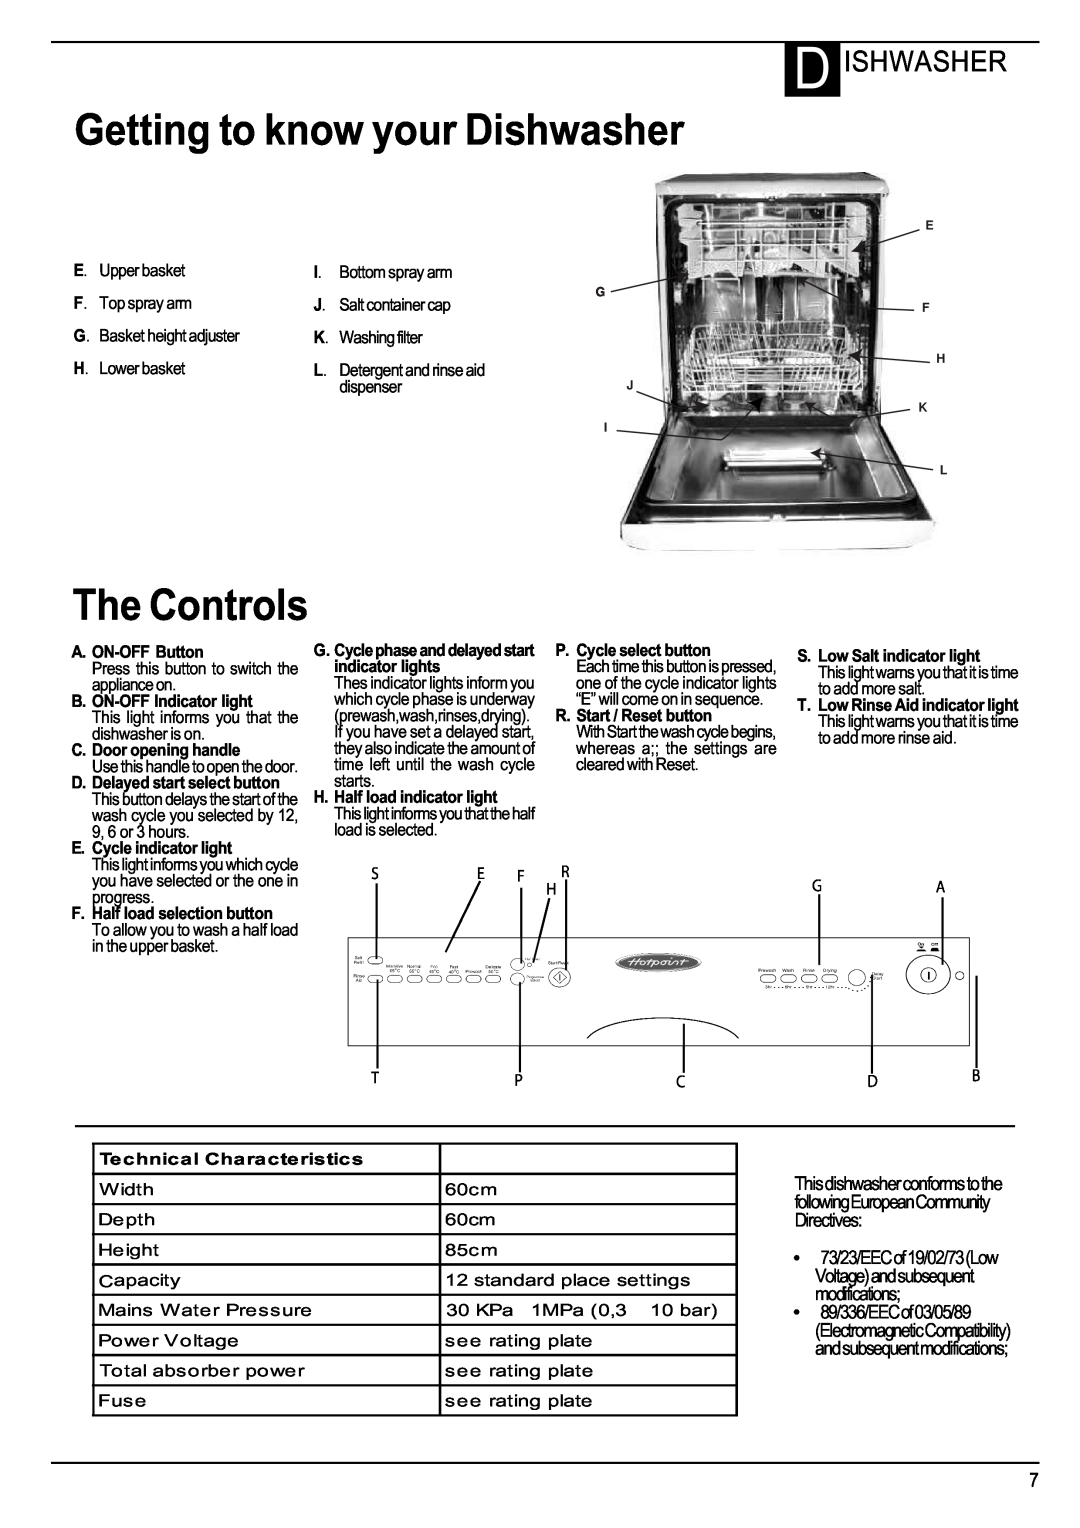 Hotpoint Instructions manual Getting to know your Dishwasher, The Controls, D Ishwasher, A. ON-OFF Button, dishwasher is on 